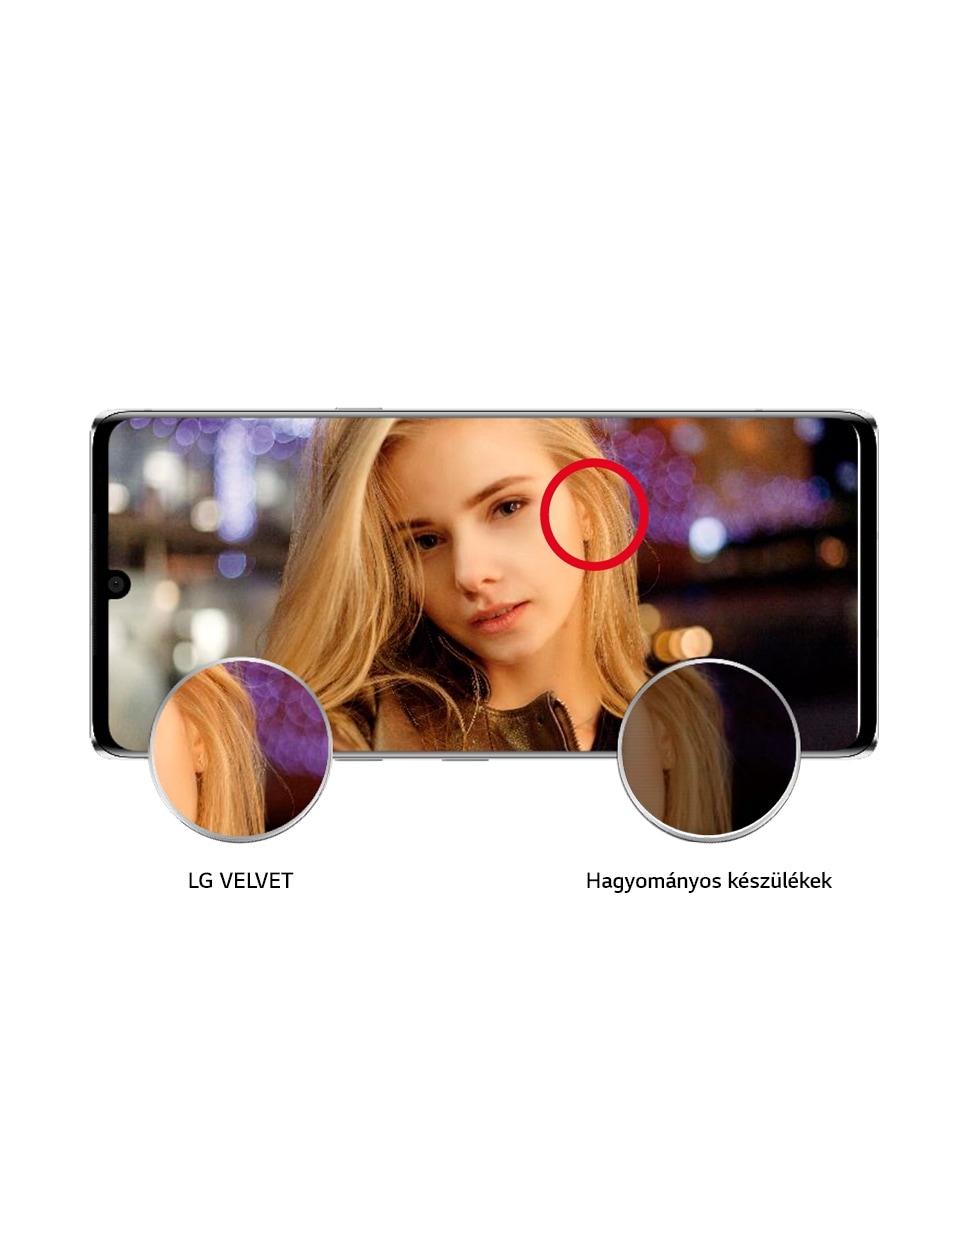 An image explaining the Quad-Cell technology feature of the LG VELVET